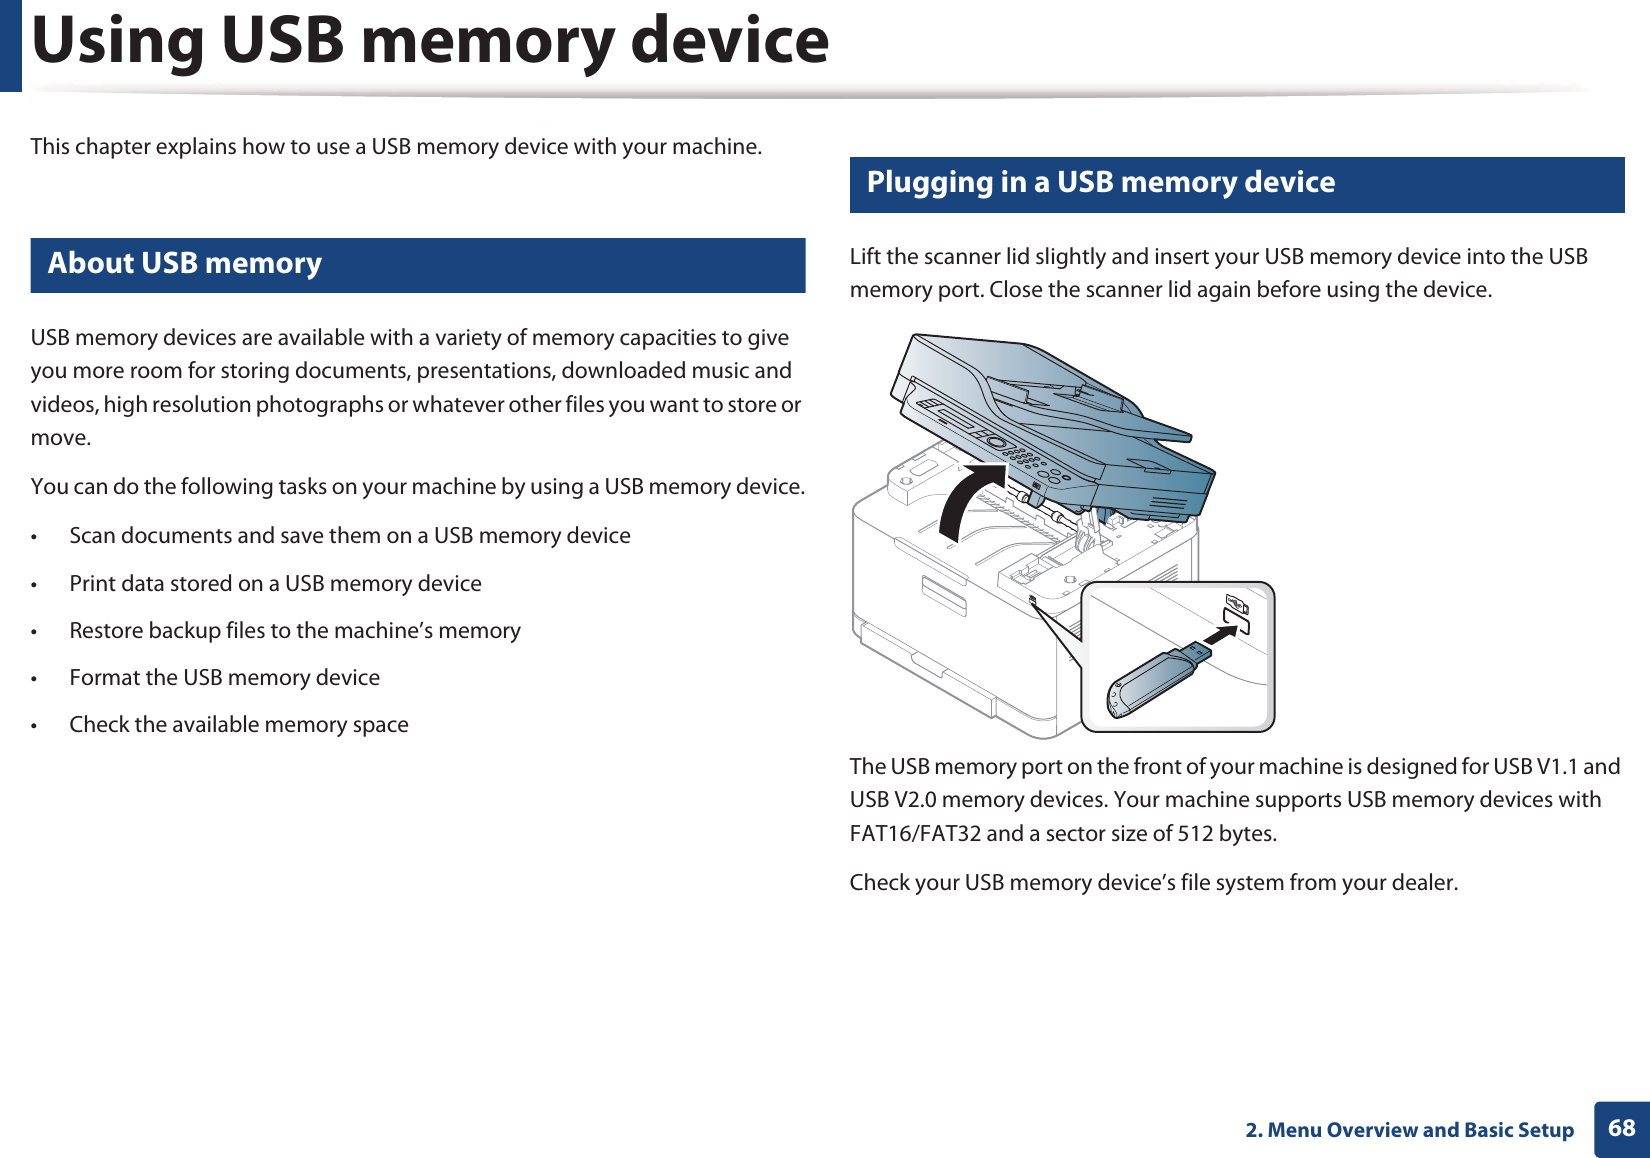 682. Menu Overview and Basic SetupUsing USB memory deviceThis chapter explains how to use a USB memory device with your machine.22 About USB memoryUSB memory devices are available with a variety of memory capacities to give you more room for storing documents, presentations, downloaded music and videos, high resolution photographs or whatever other files you want to store or move.You can do the following tasks on your machine by using a USB memory device.• Scan documents and save them on a USB memory device• Print data stored on a USB memory device• Restore backup files to the machine’s memory• Format the USB memory device• Check the available memory space23 Plugging in a USB memory deviceLift the scanner lid slightly and insert your USB memory device into the USB memory port. Close the scanner lid again before using the device.The USB memory port on the front of your machine is designed for USB V1.1 and USB V2.0 memory devices. Your machine supports USB memory devices with FAT16/FAT32 and a sector size of 512 bytes.Check your USB memory device’s file system from your dealer.